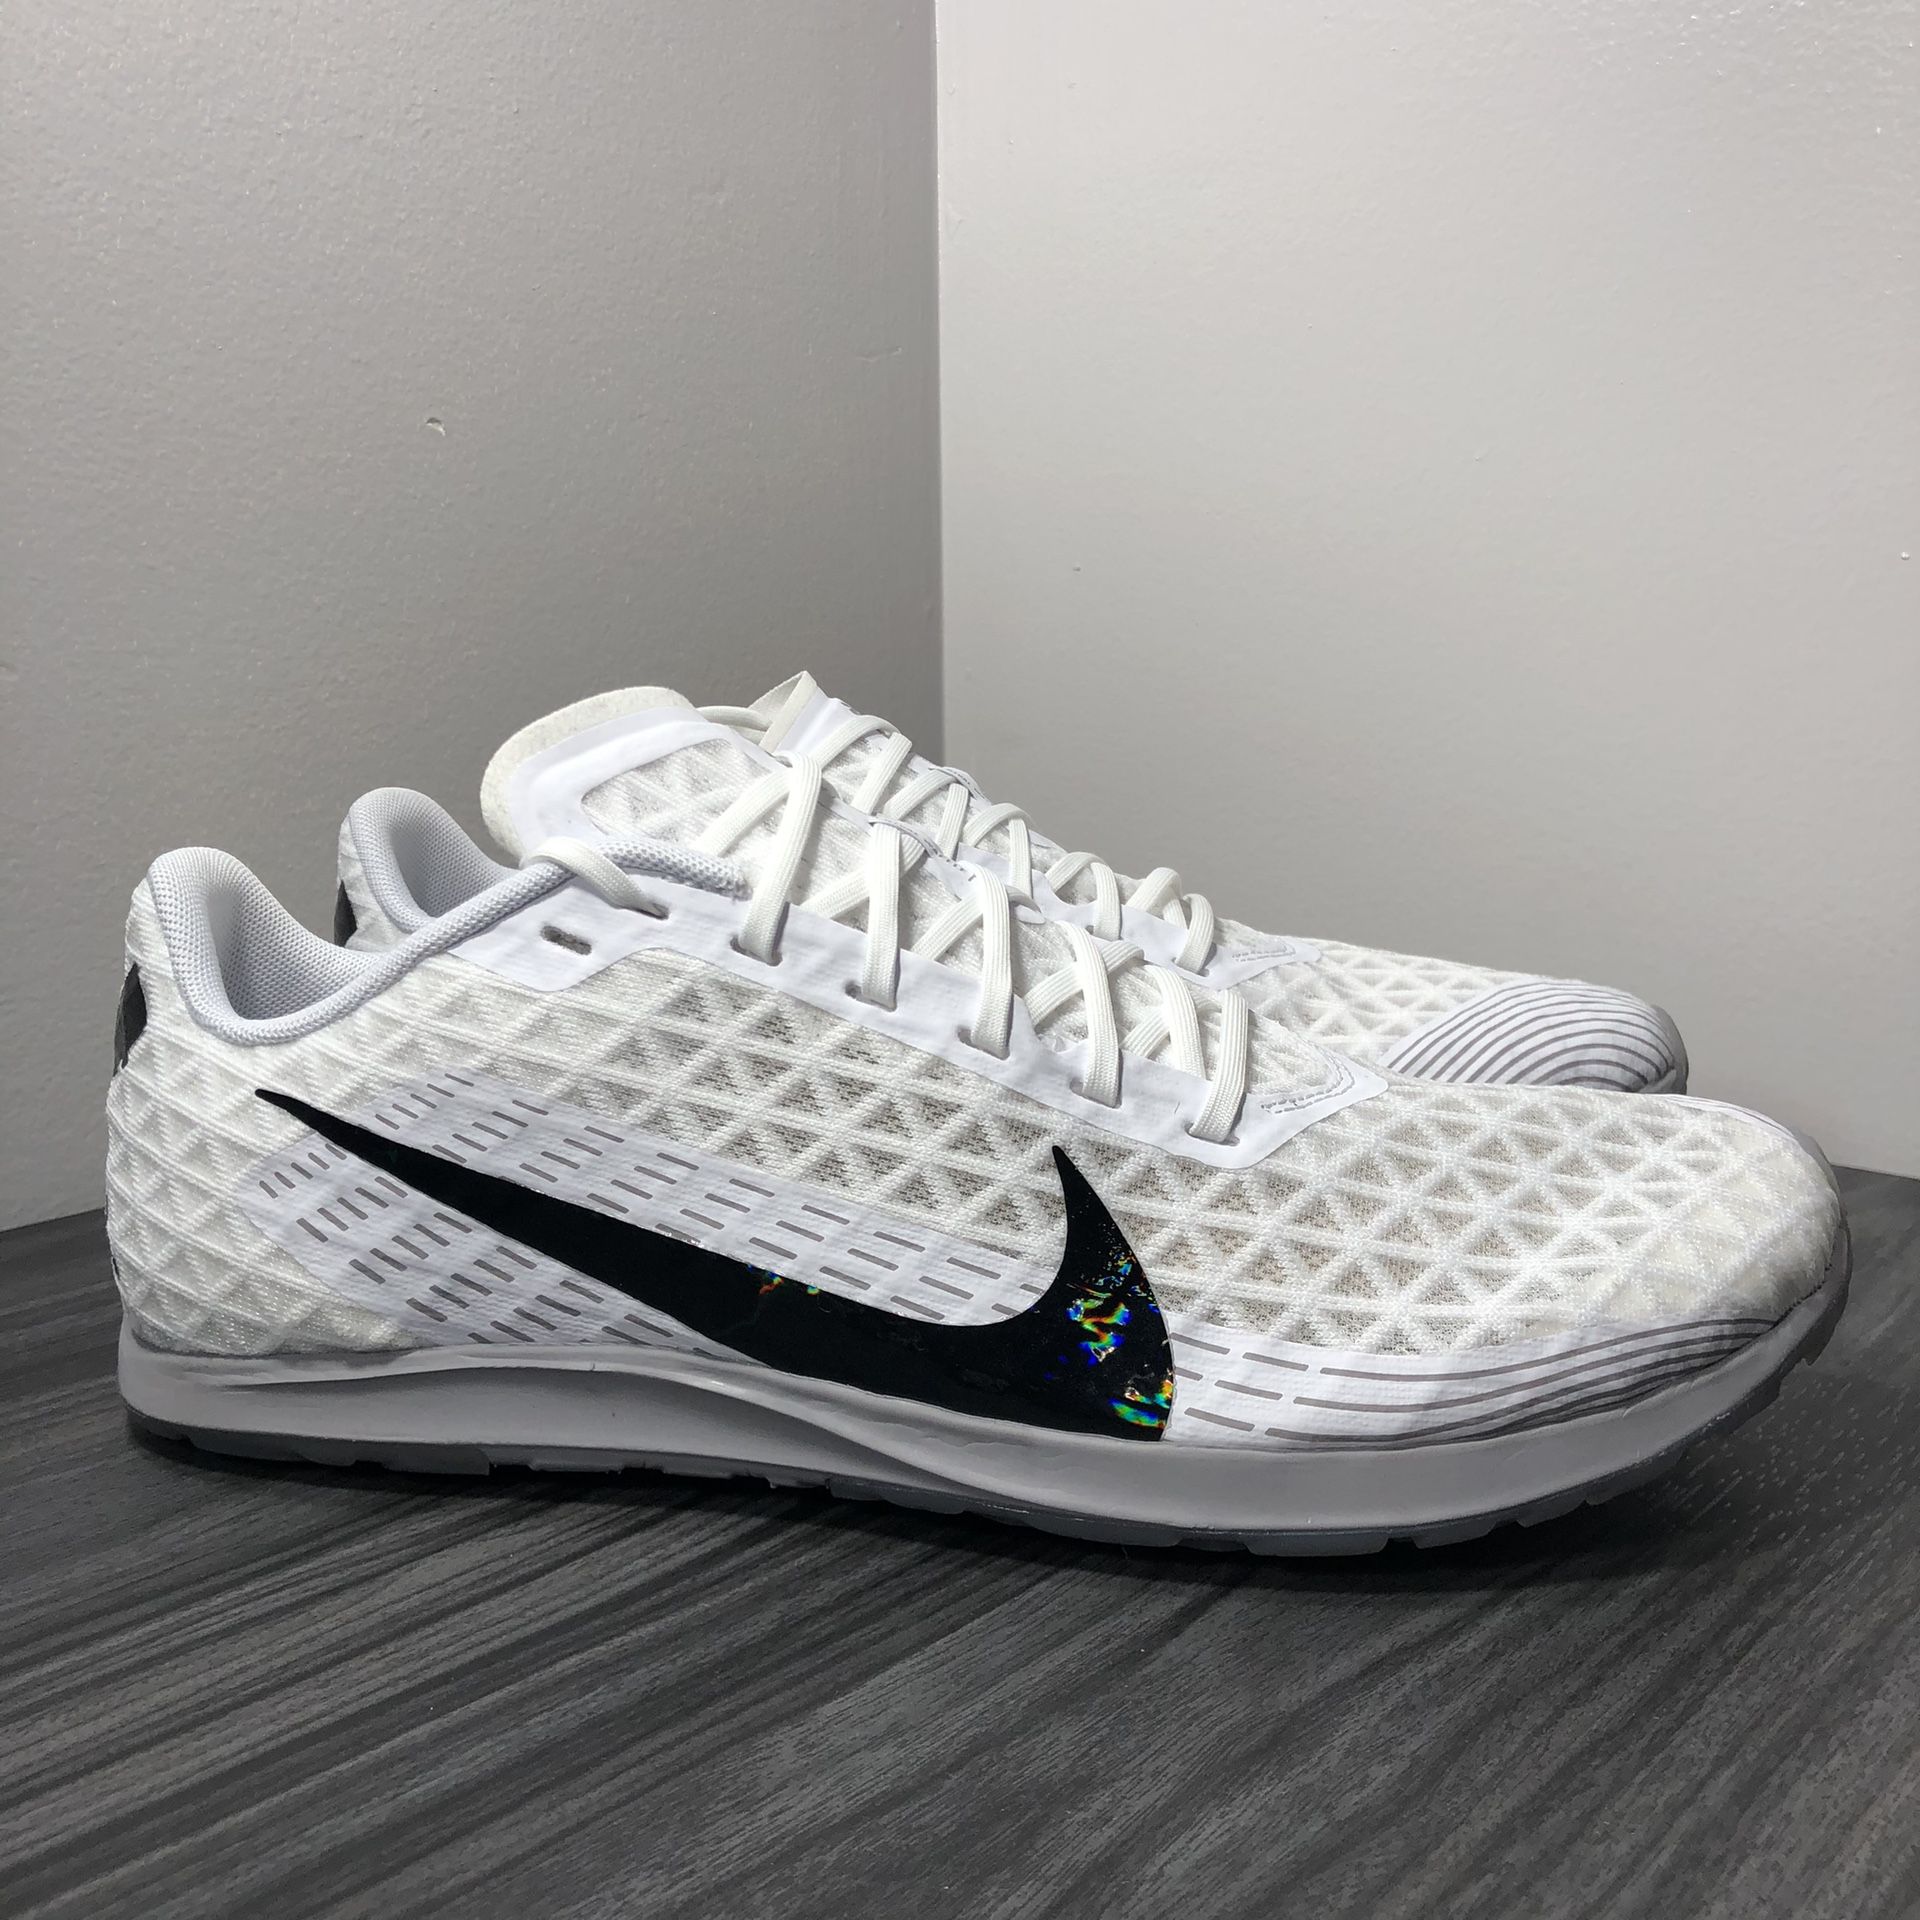 Nike Zoom Rival Waffle 2019 Running Shoes